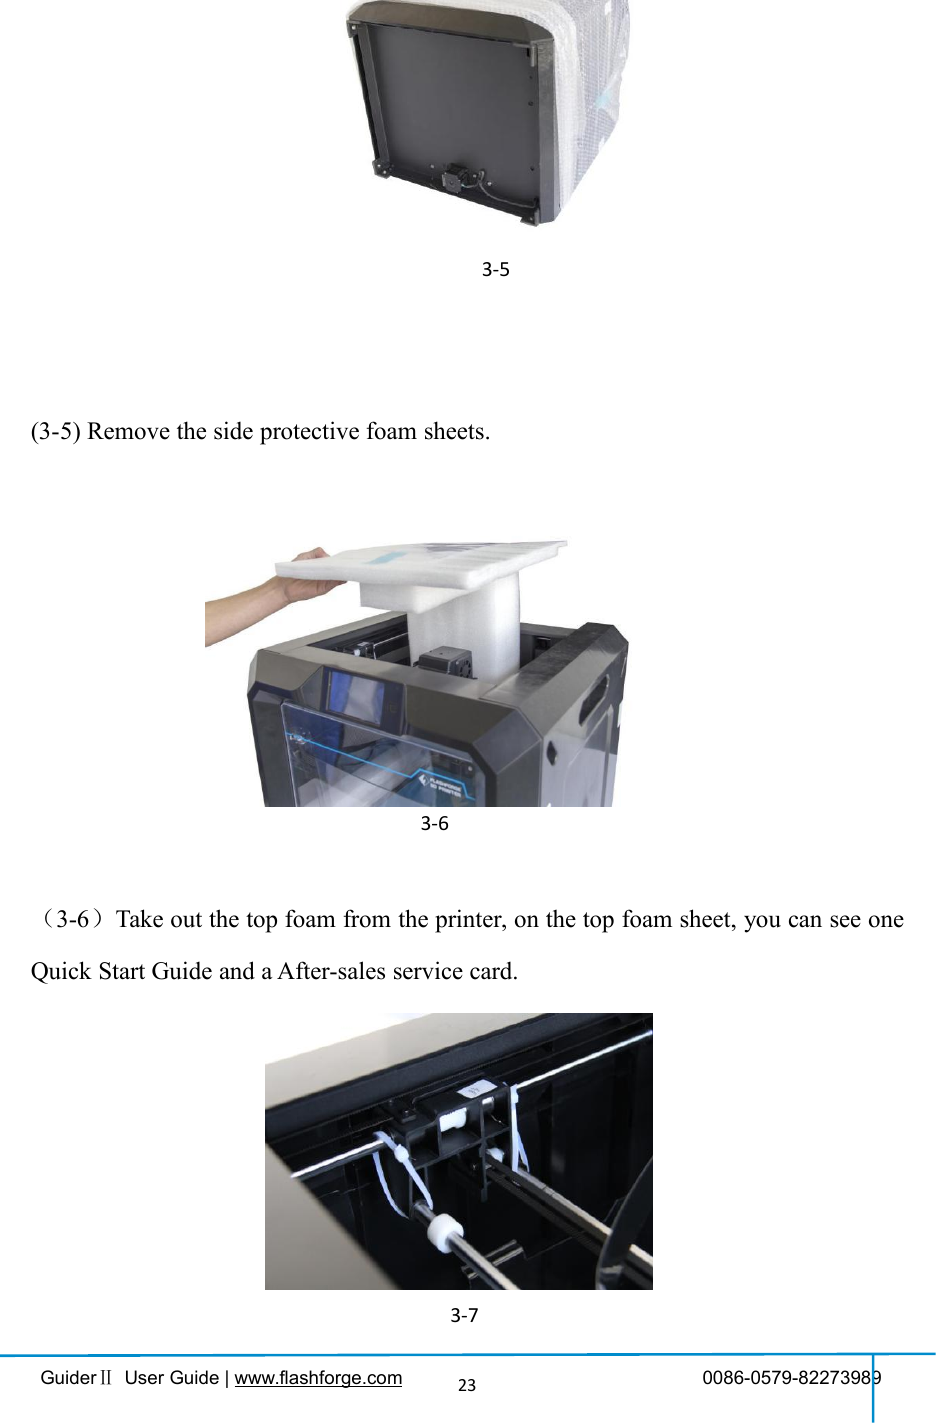 GuiderⅡUser Guide | www.flashforge.com 0086-0579-8227398923(3-5) Remove the bag to unveil the GuiderⅡ.(3-5) Remove the side protective foam sheets.（3-6）Take out the top foam from the printer, on the top foam sheet, you can see oneQuick Start Guide and a After-sales service card.3-63-53-7